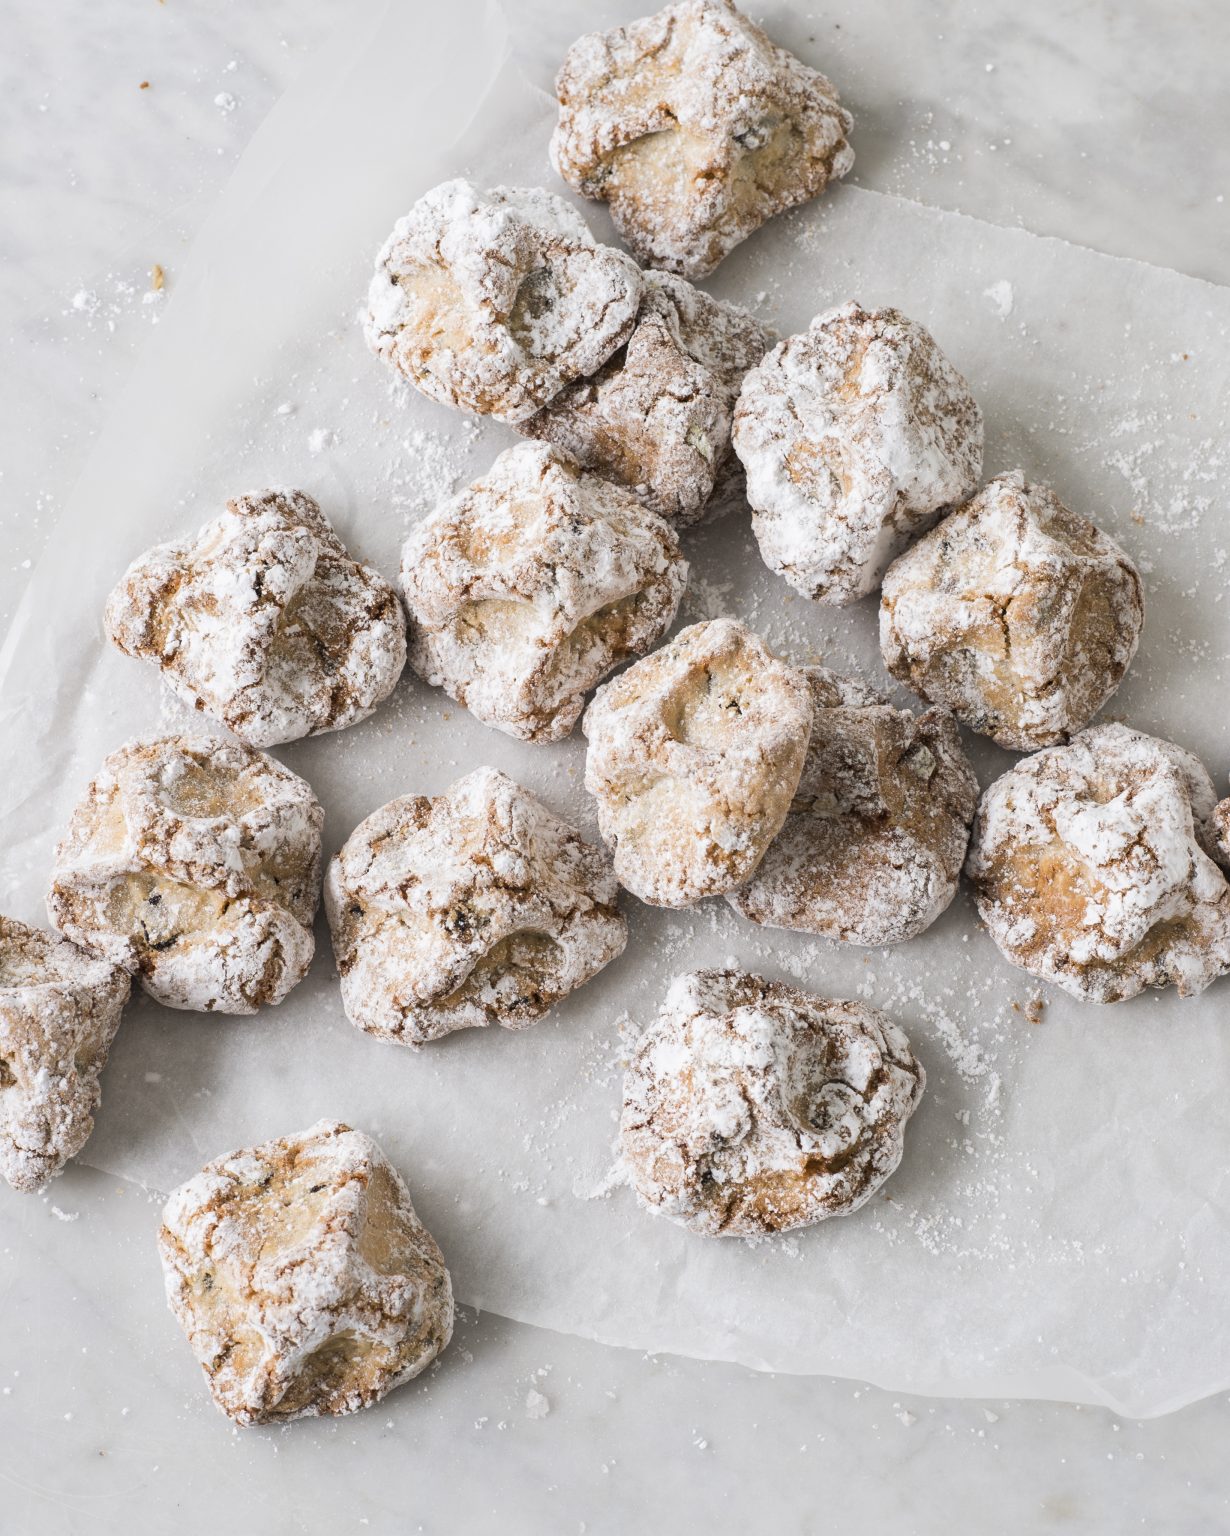 Bag of 6 delightful amaretti cookies, featuring a perfect balance of almond flavor and sweet, crunchy texture